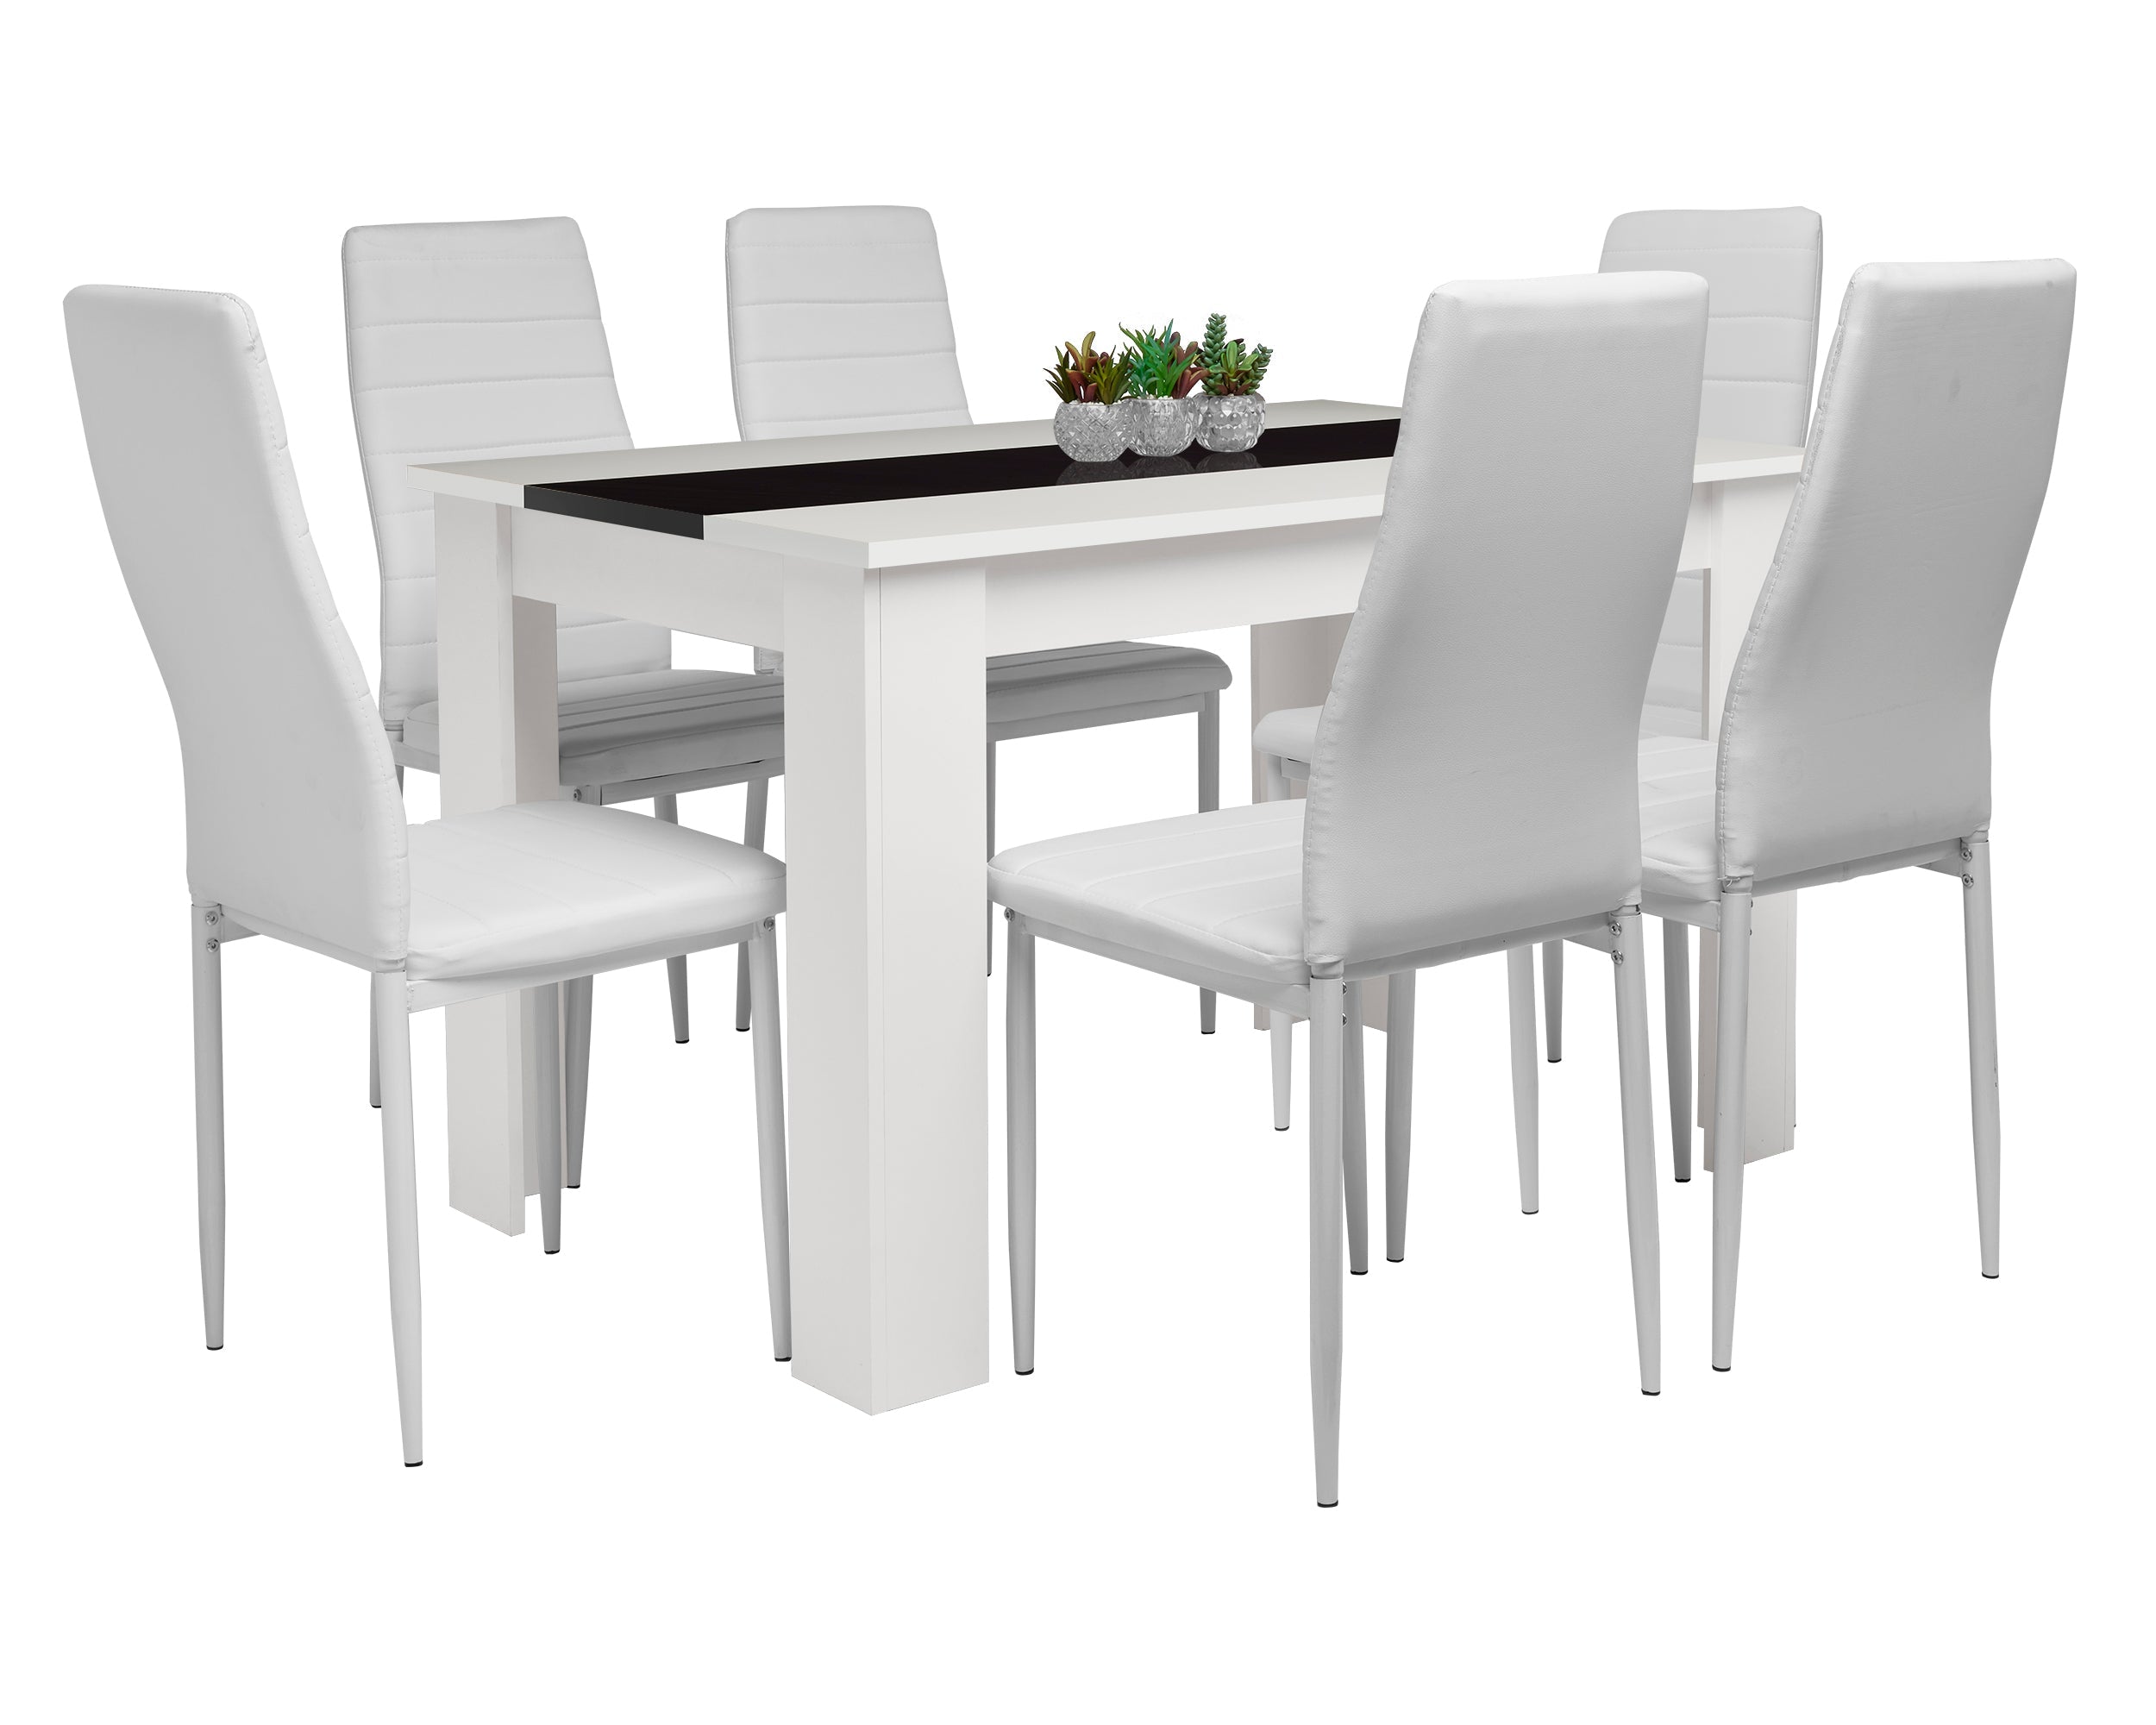 dining table 6 seater